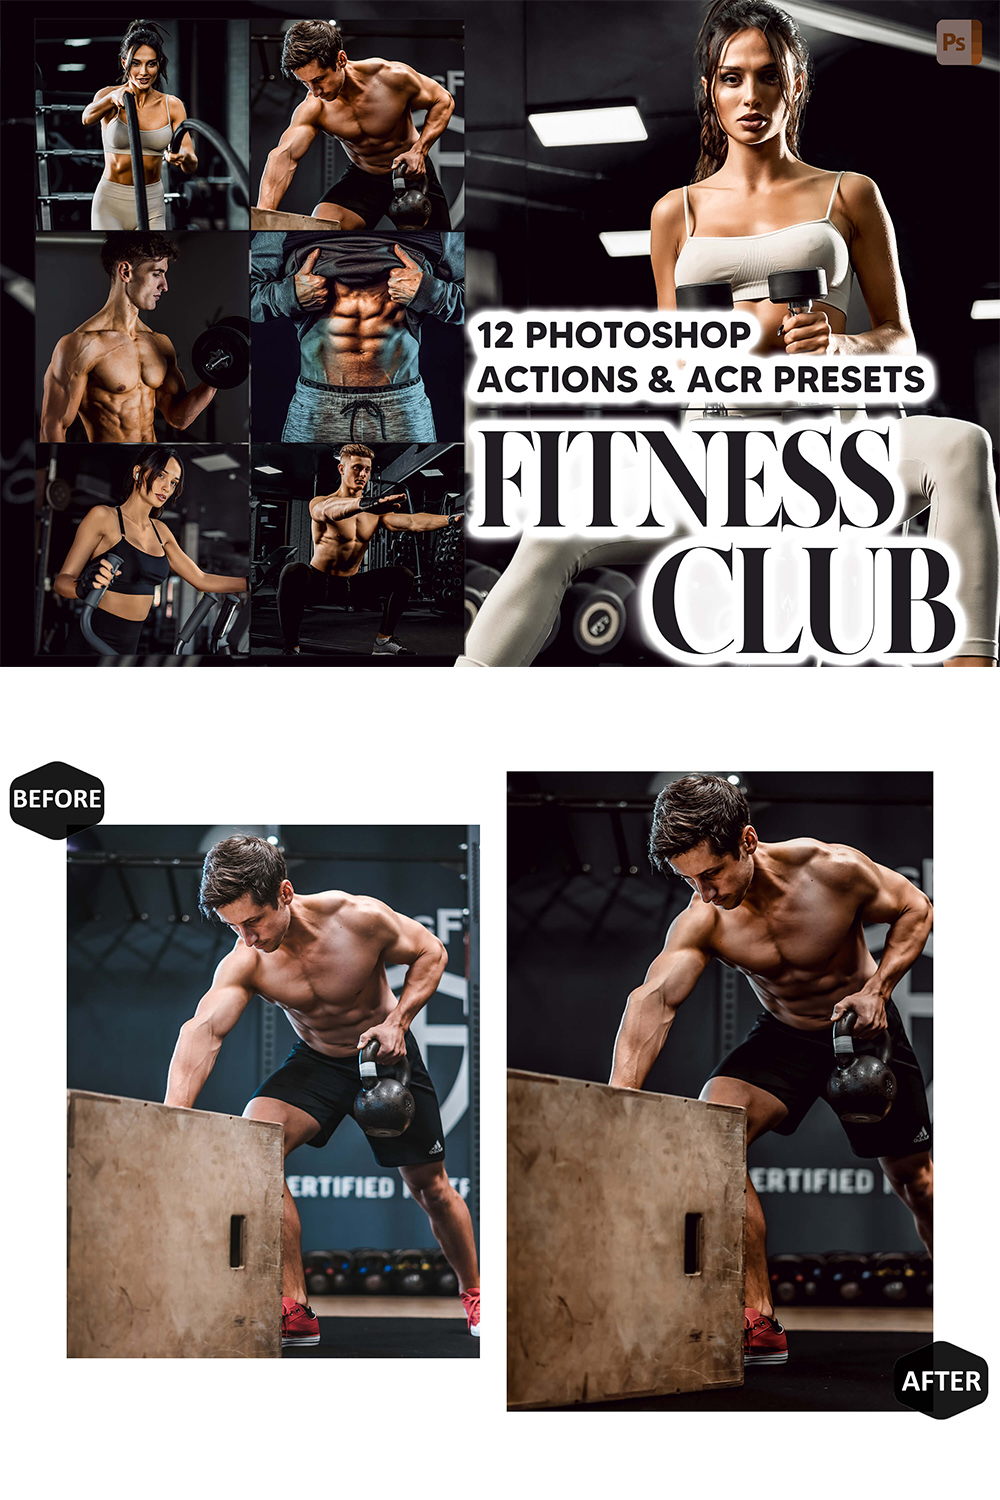 12 Photoshop Actions, Fitness Club Ps Action, Bodybuilding ACR Preset, Sport Ps Filter, Atn Portrait And Lifestyle Theme Instagram, Blogger pinterest preview image.